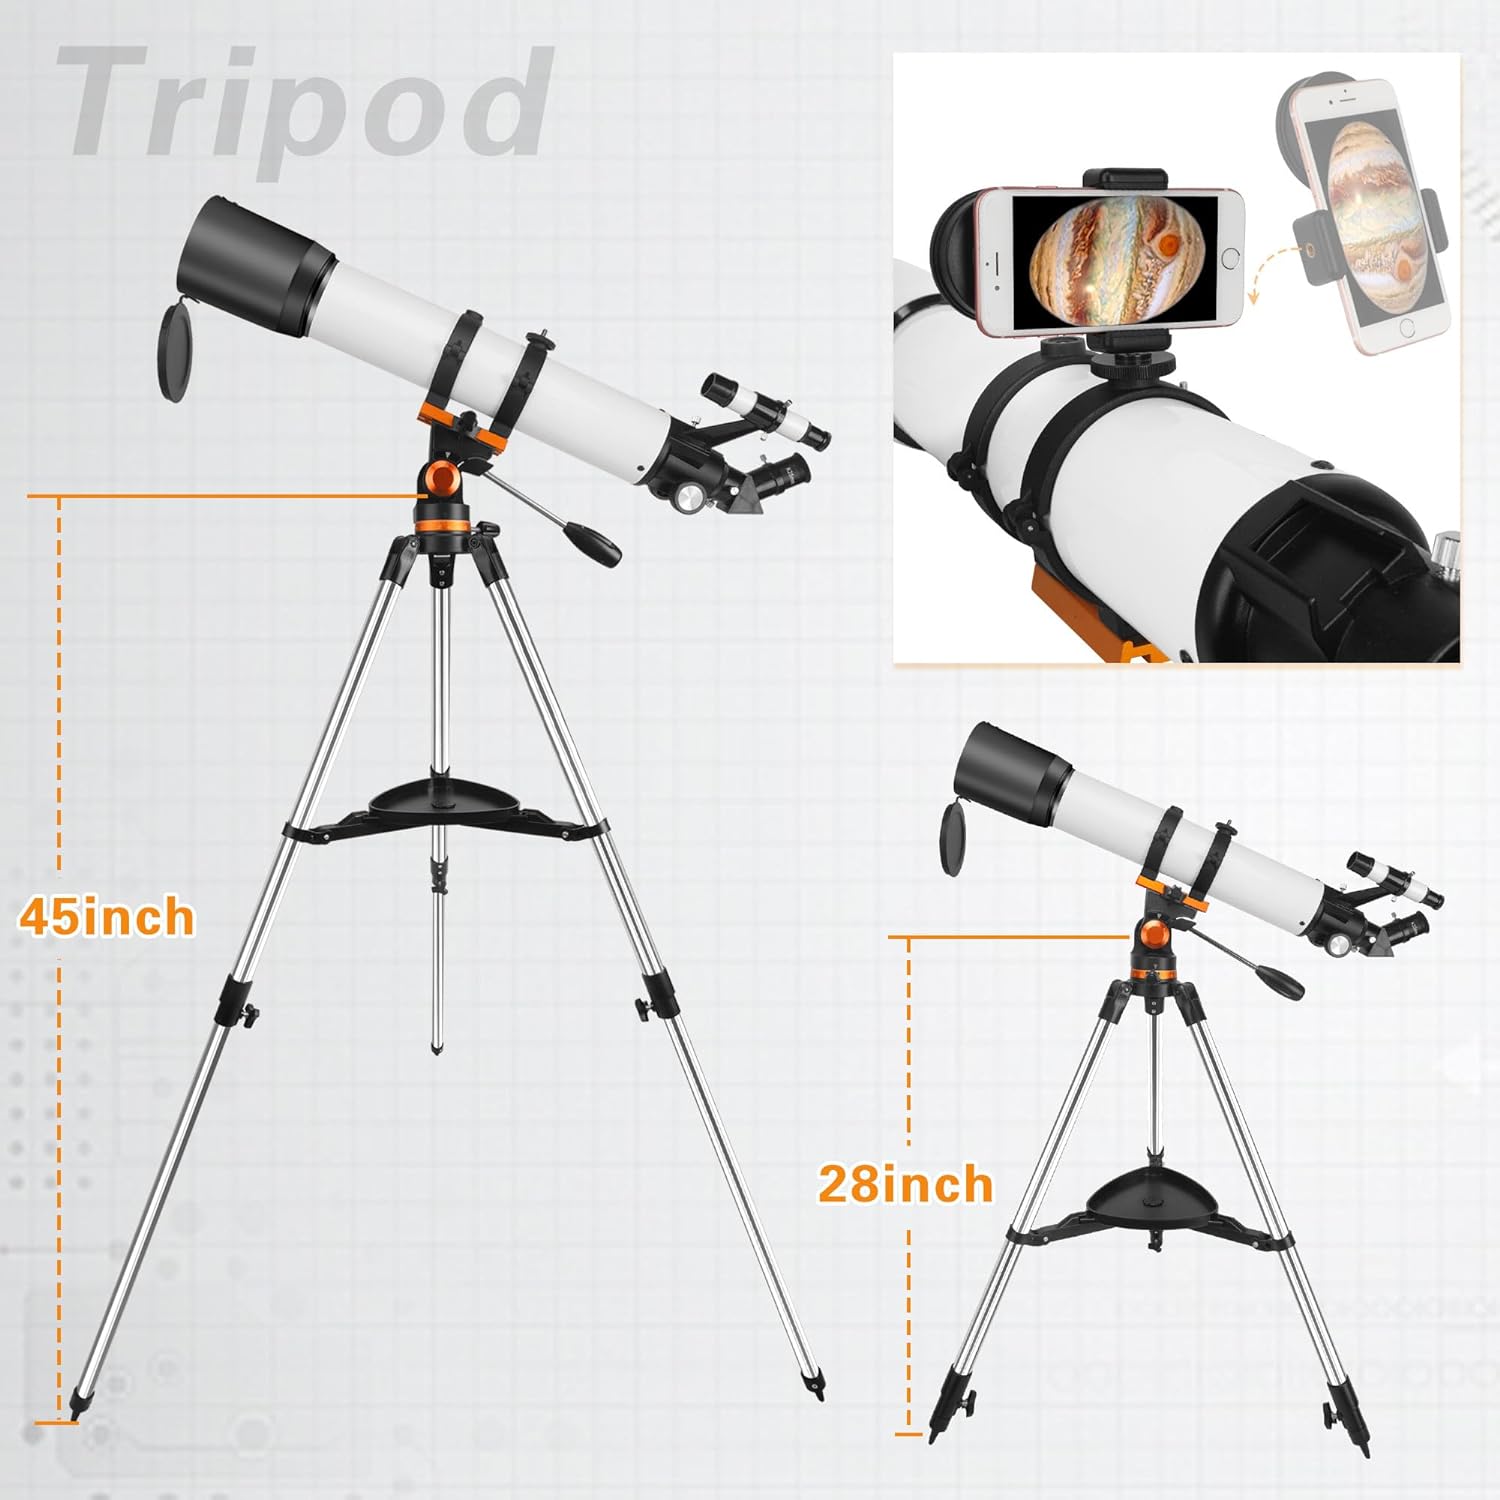 HAWKKO Telescopes, 90mm Aperture Telescope for Adults Astronomy, 700mm Refracting Telescope Fully Multi-Coated High Transmission Coatings with AZ Mount Tripod Phone Adapter Viewing Planets and Stars